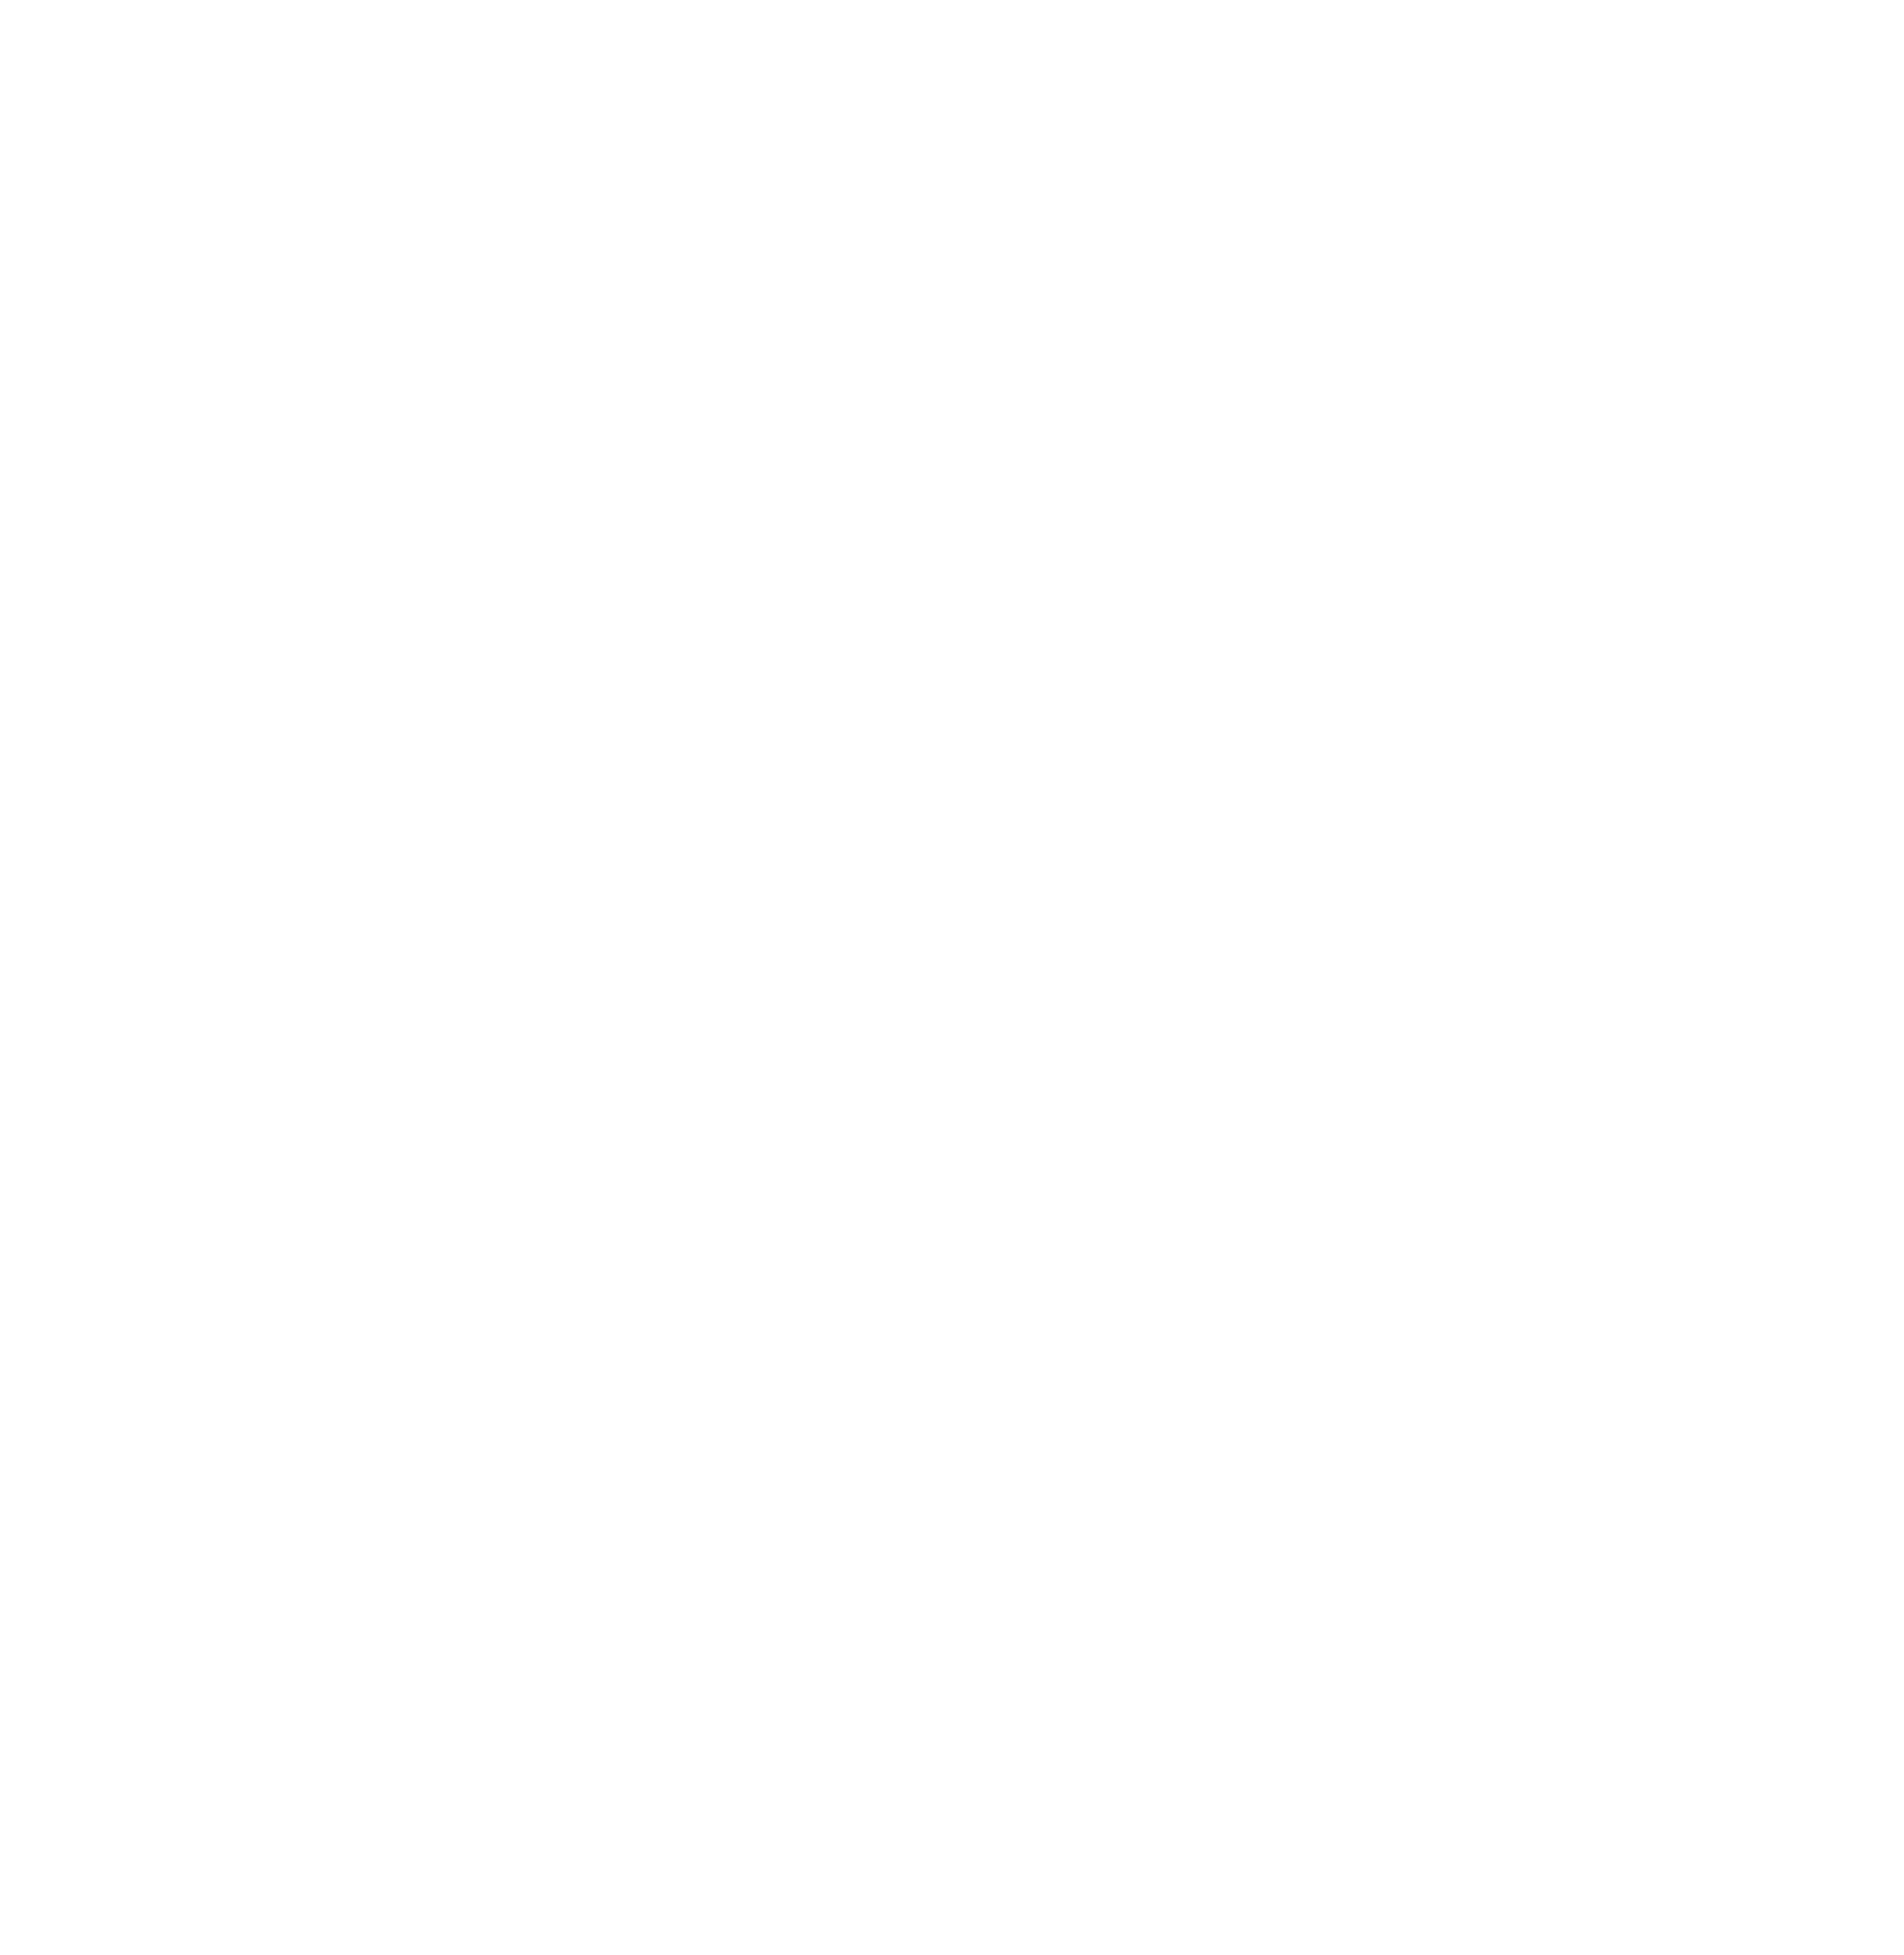 ACI | Icon showing a beach scene with the sun in the sky and surfboards